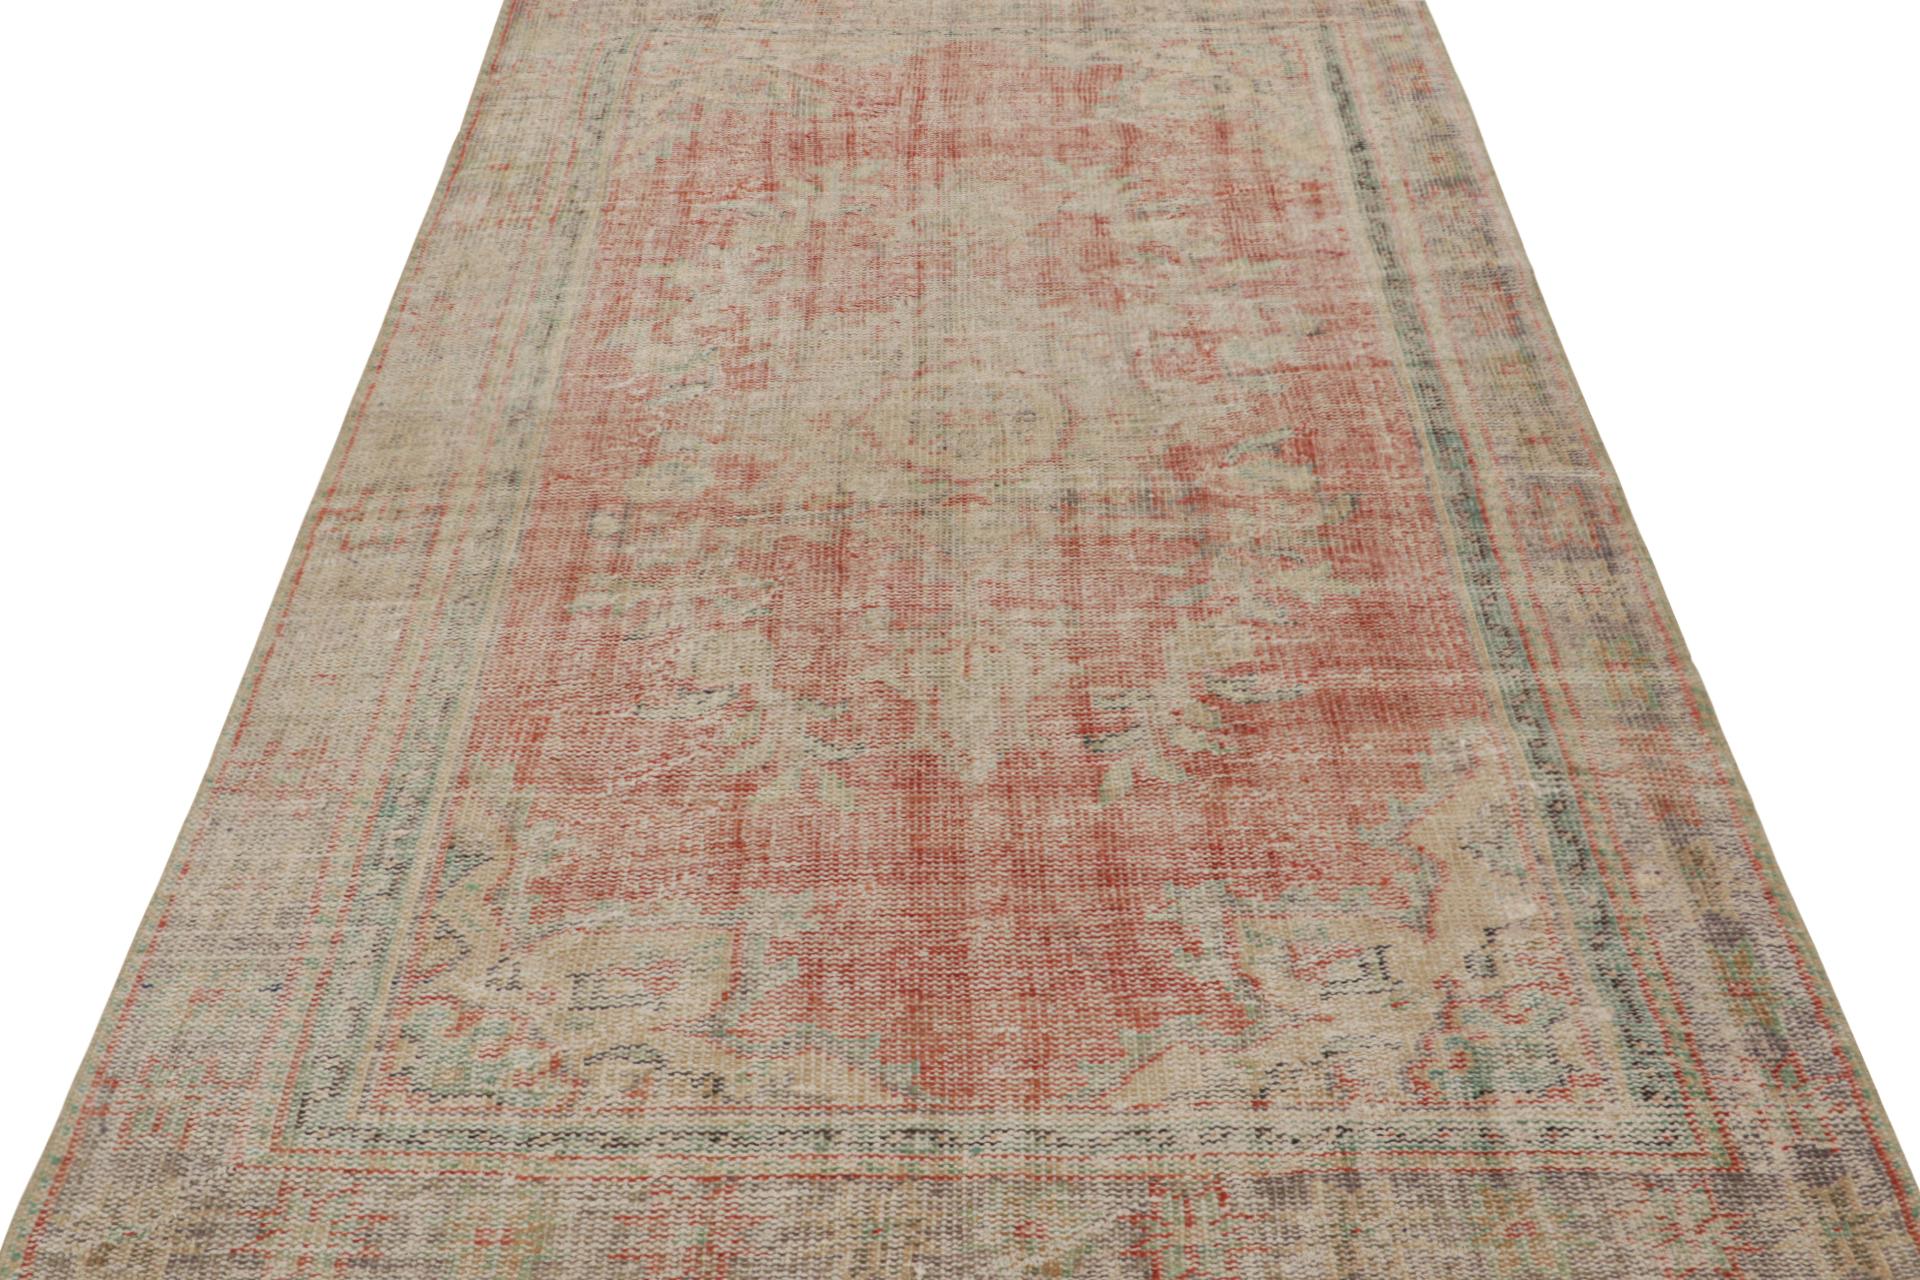 Turkish Vintage European Style Rug, with Geometric Floral Patterns, from Rug & Kilim  For Sale